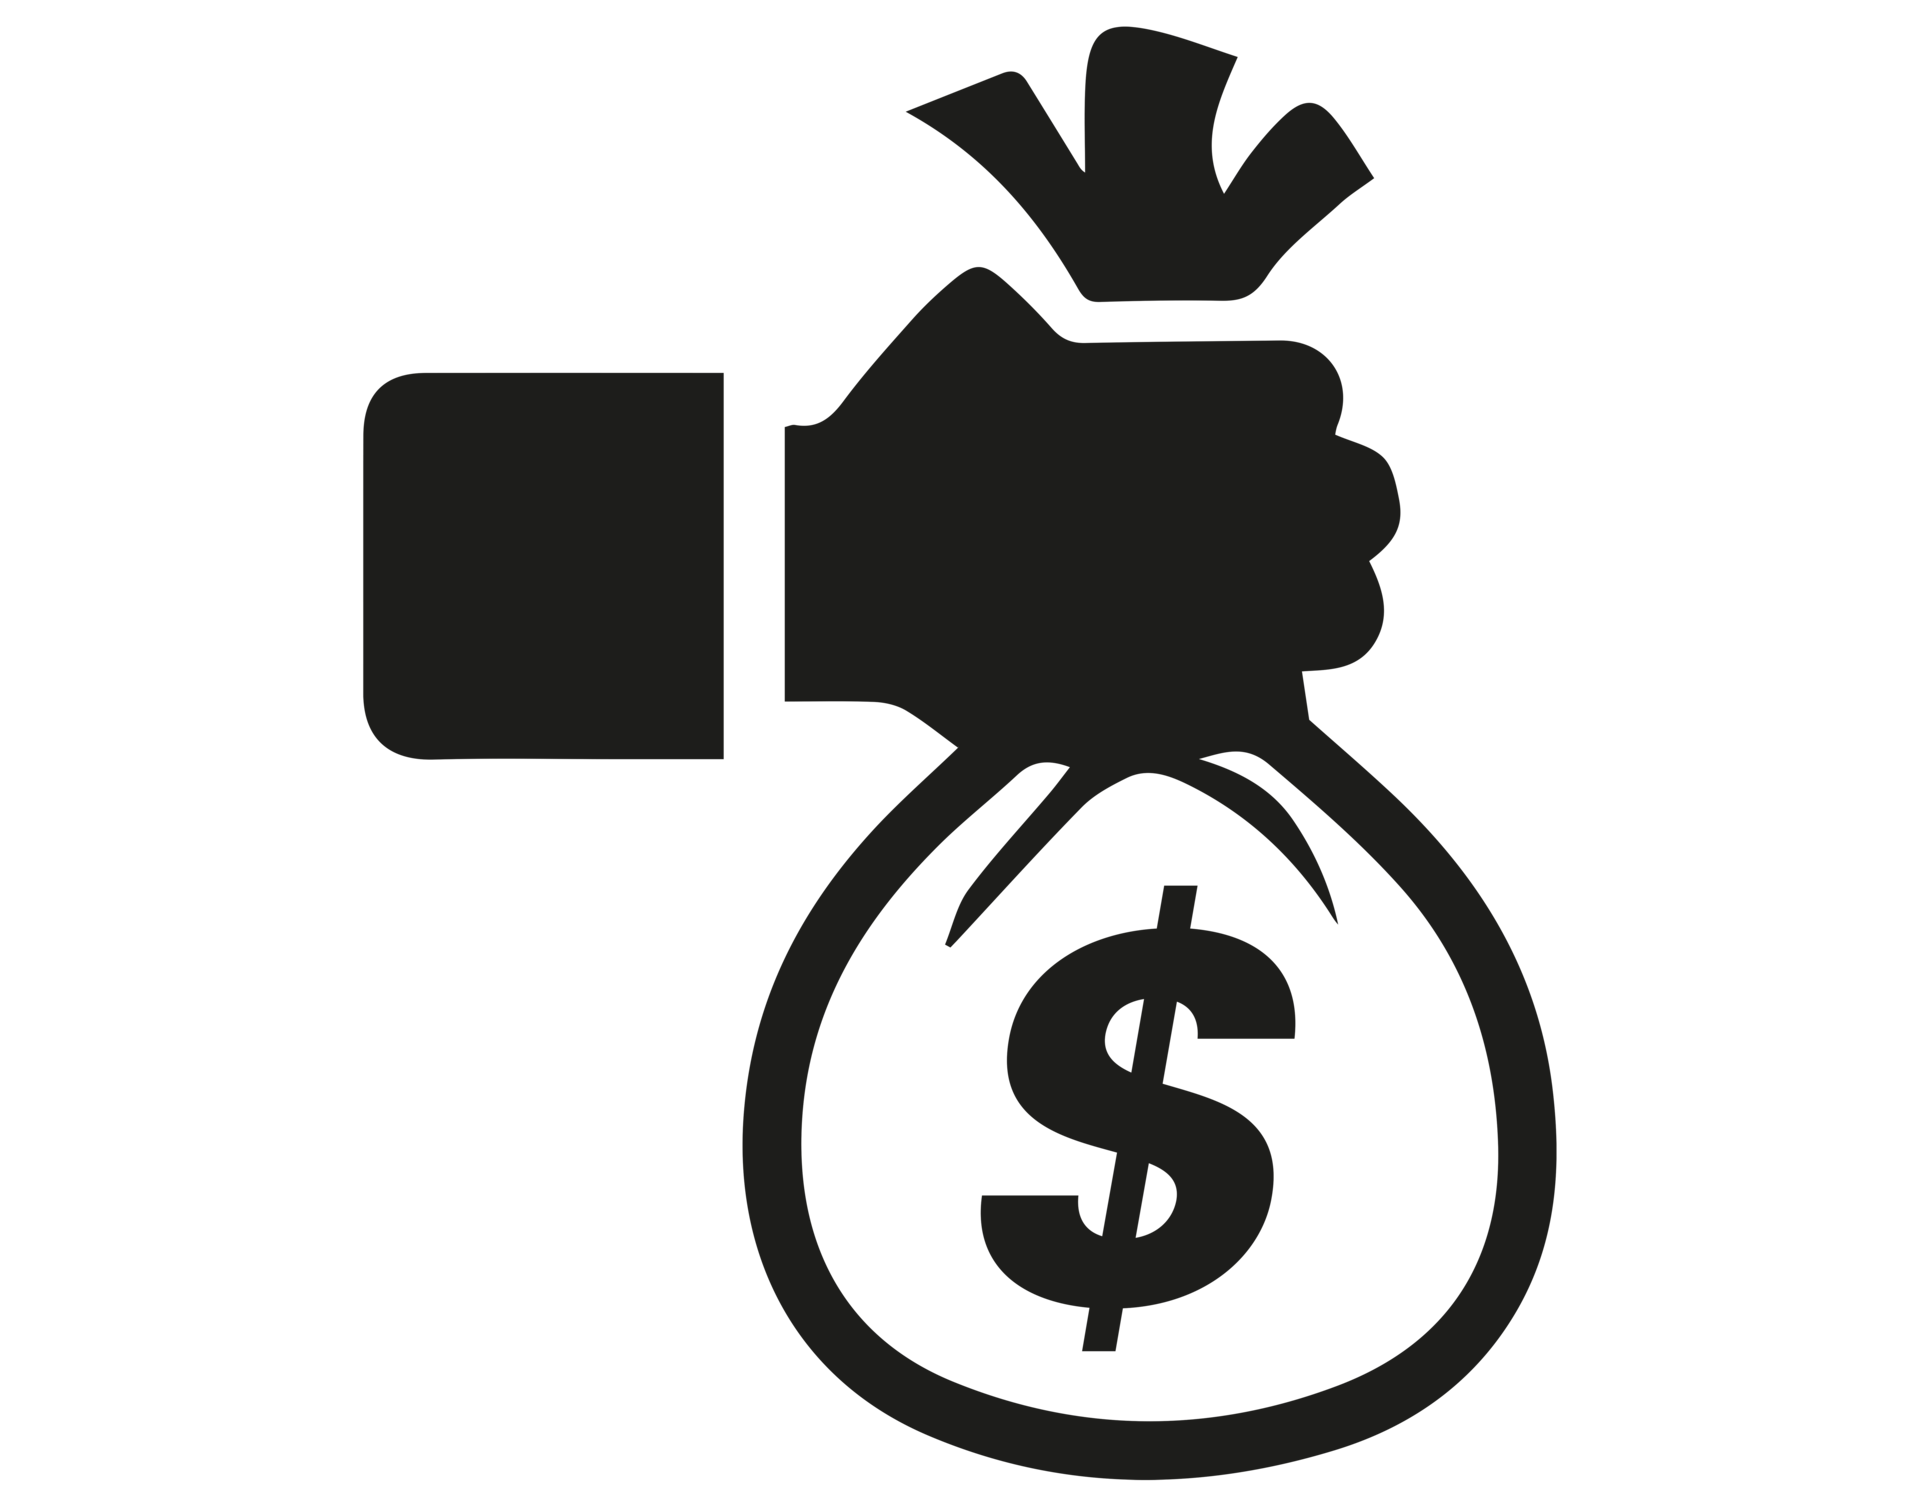 holding money bag icon on transparent background free png